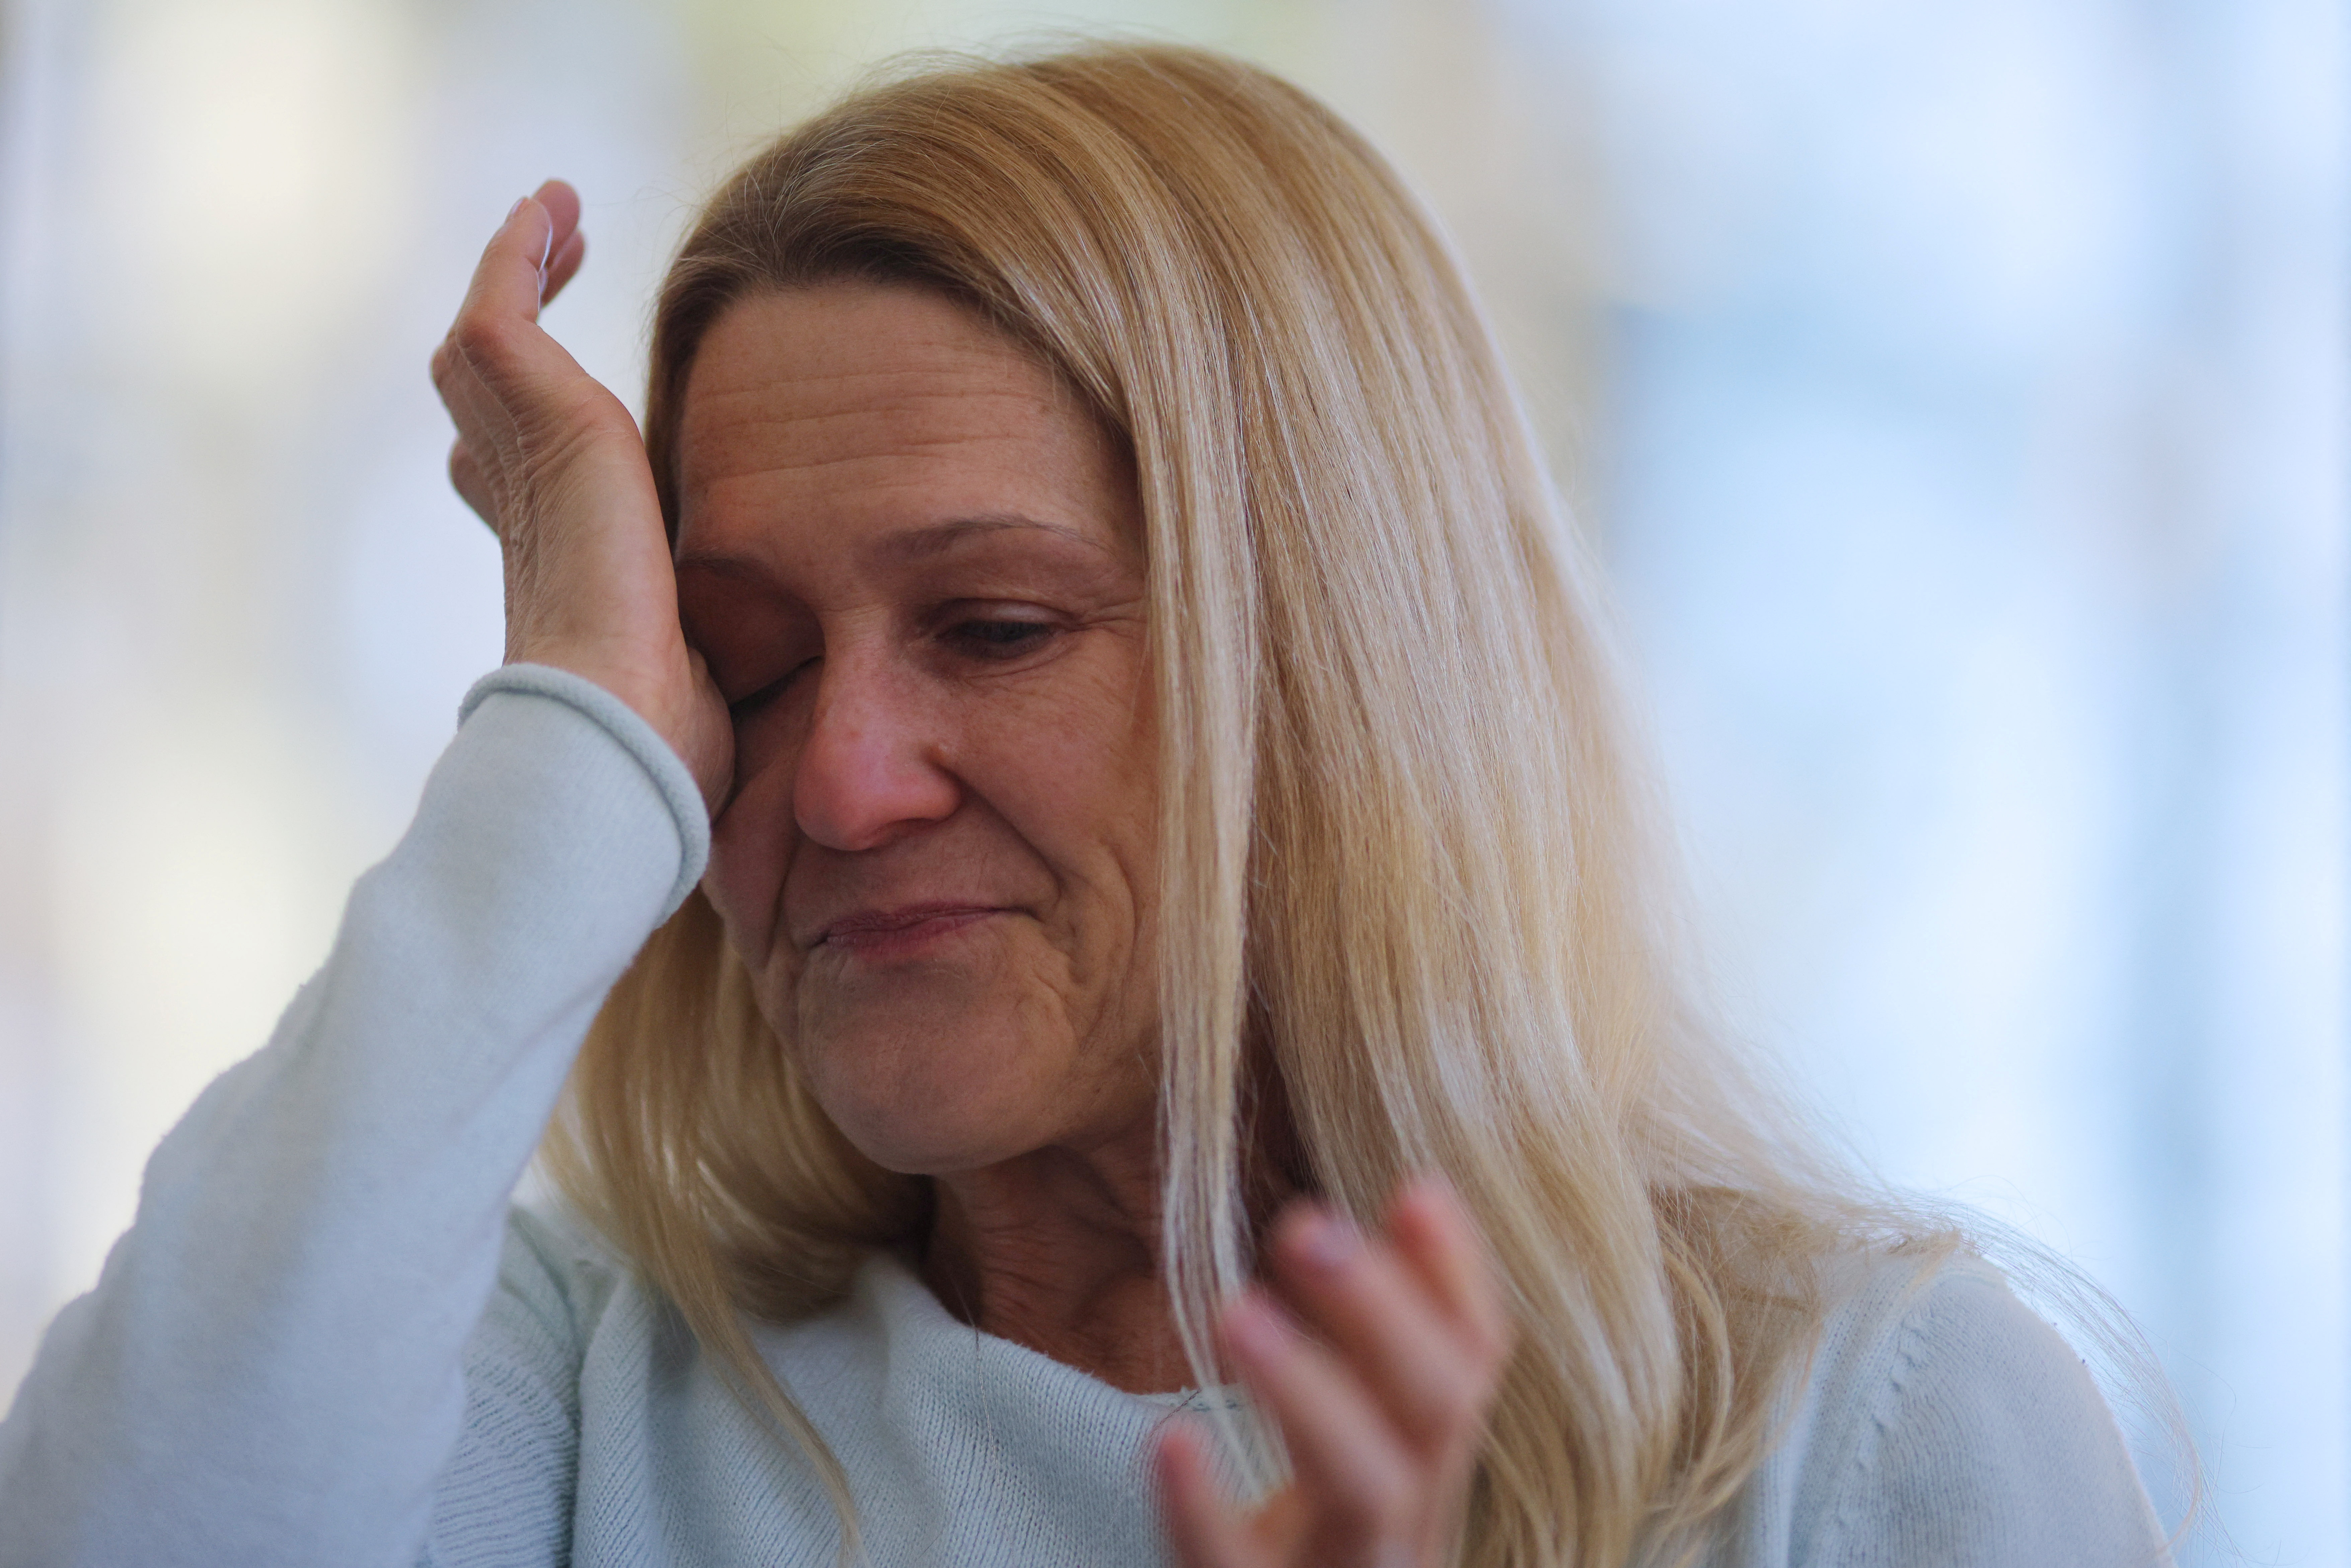 Wendy Nelson lives with genetic markers for Alzheimer's disease, in Foxborough